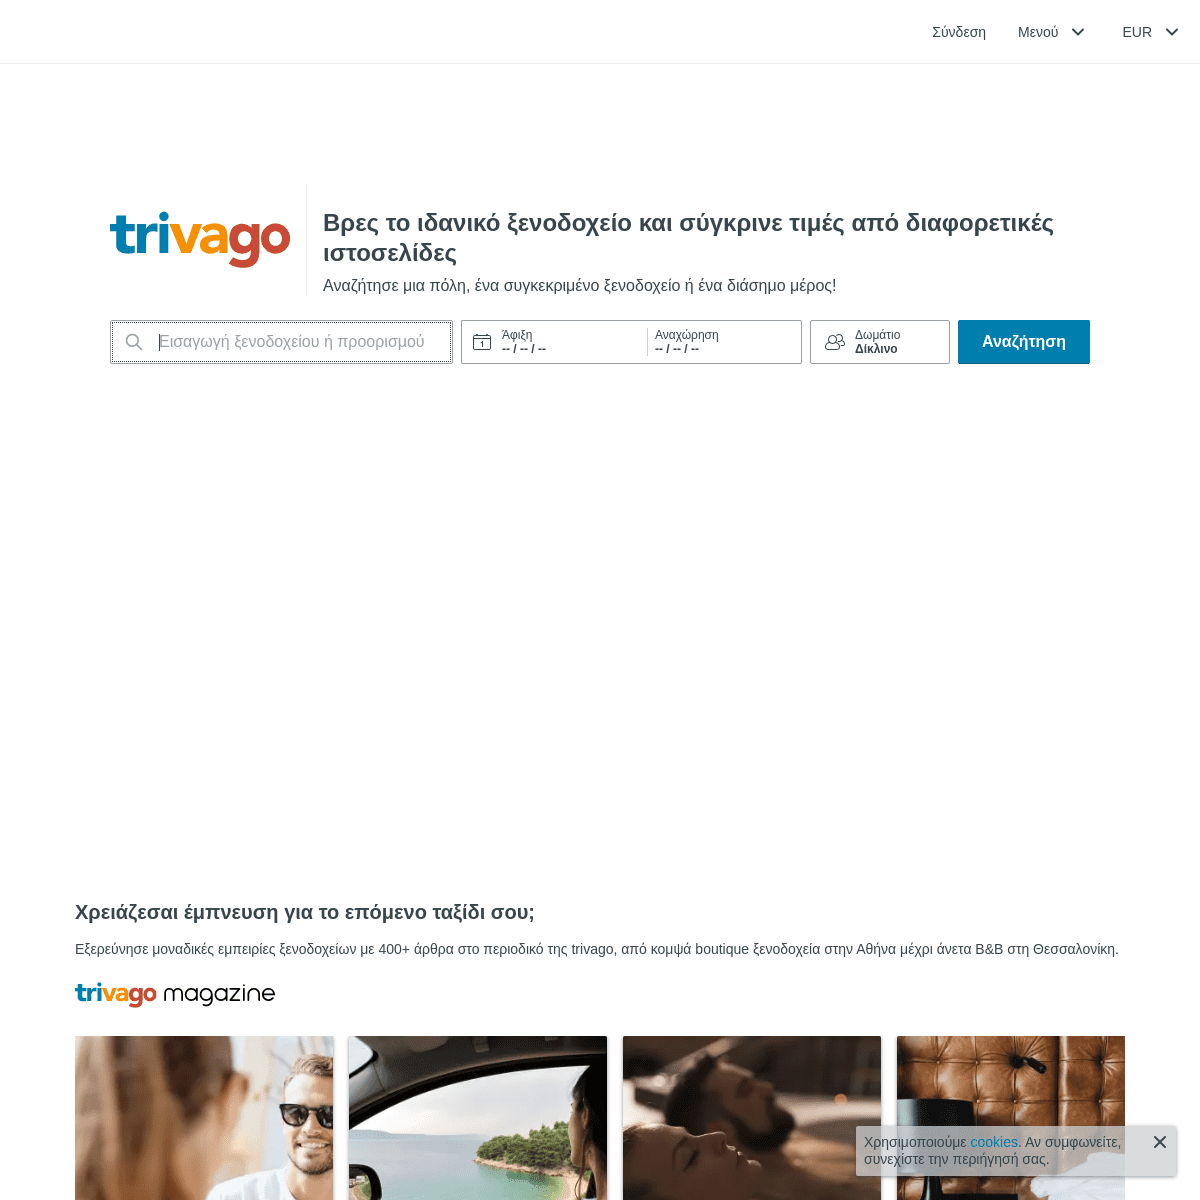 A complete backup of trivago.gr